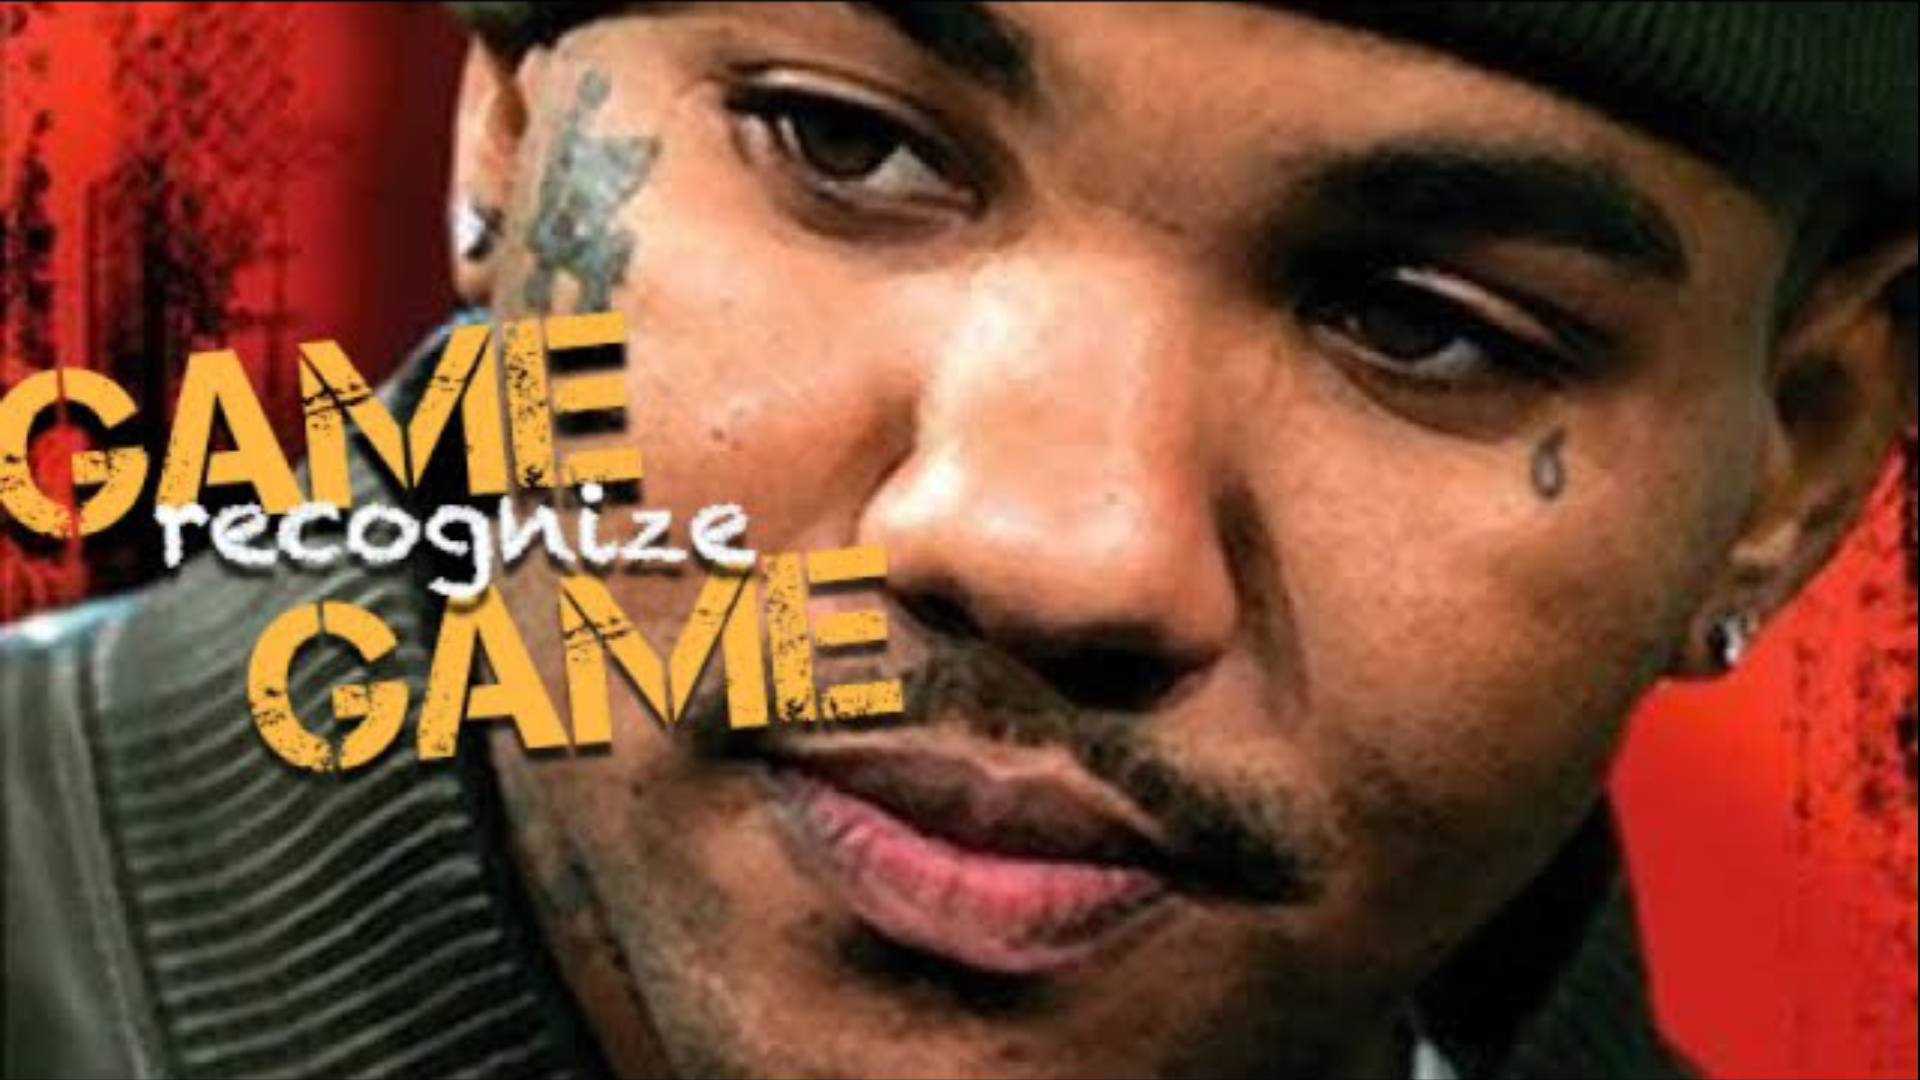 The Game: Game Recognize Game